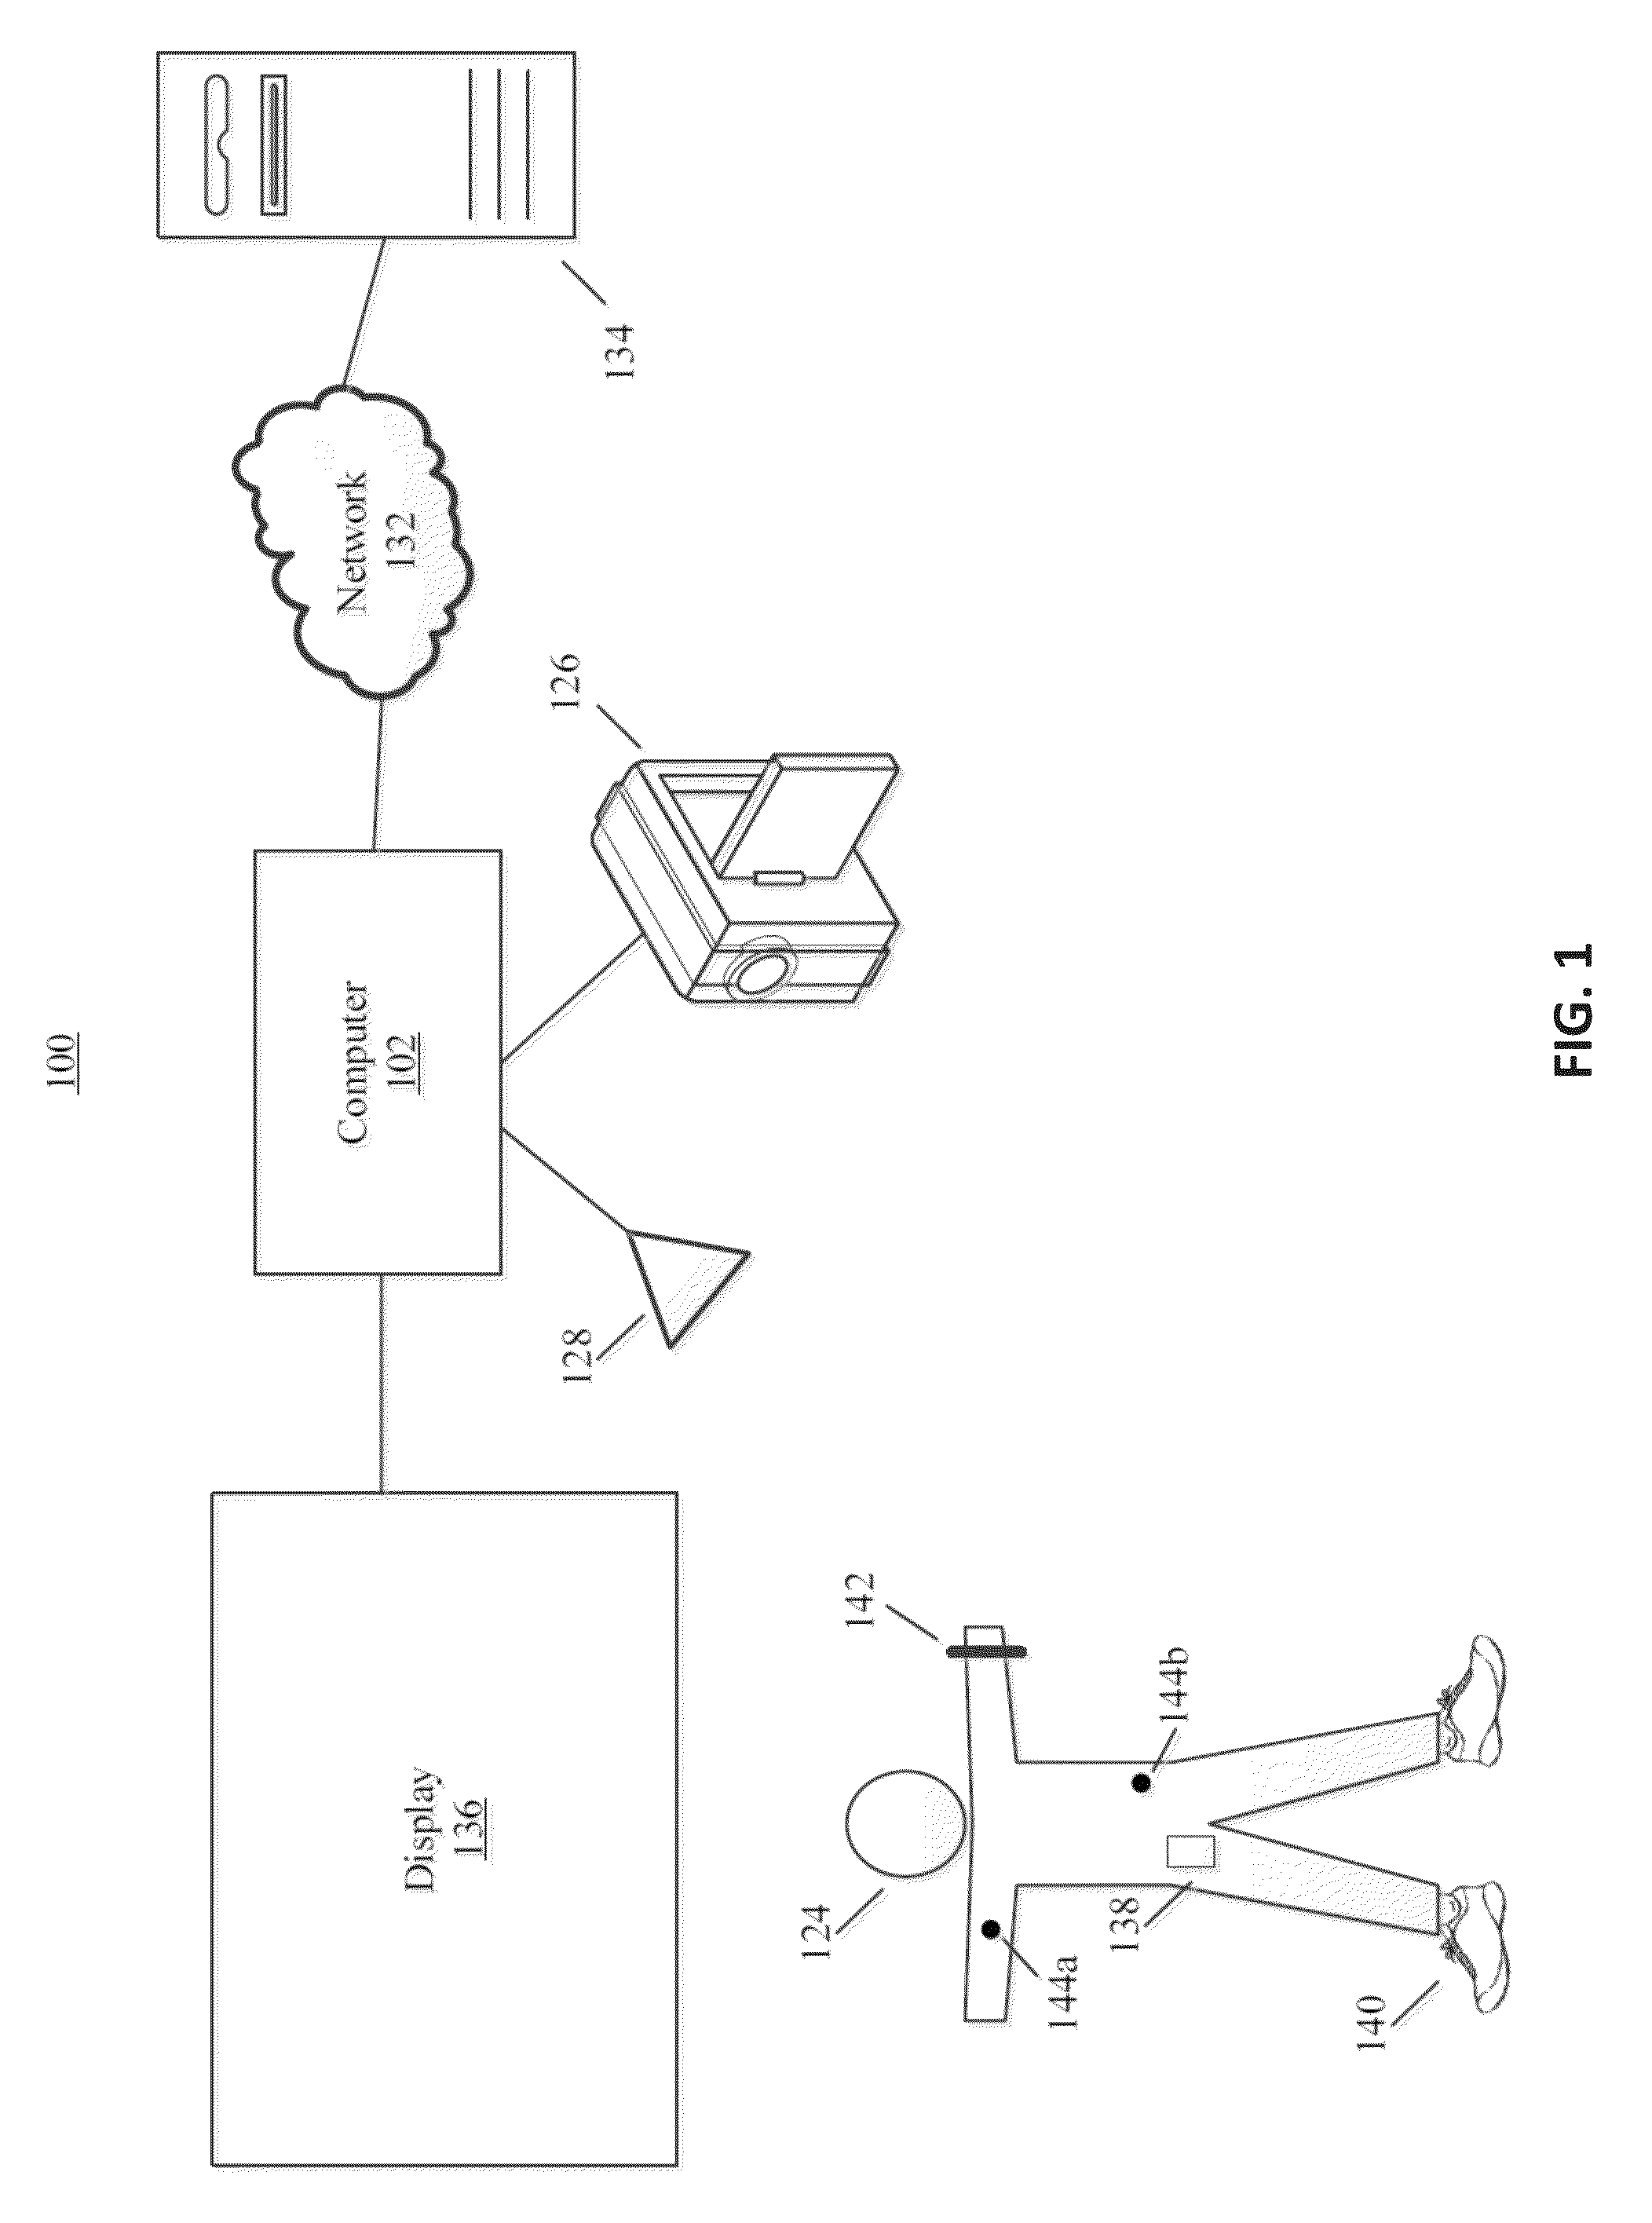 Wearable device assembly with ability to mitigate data loss due to component failure